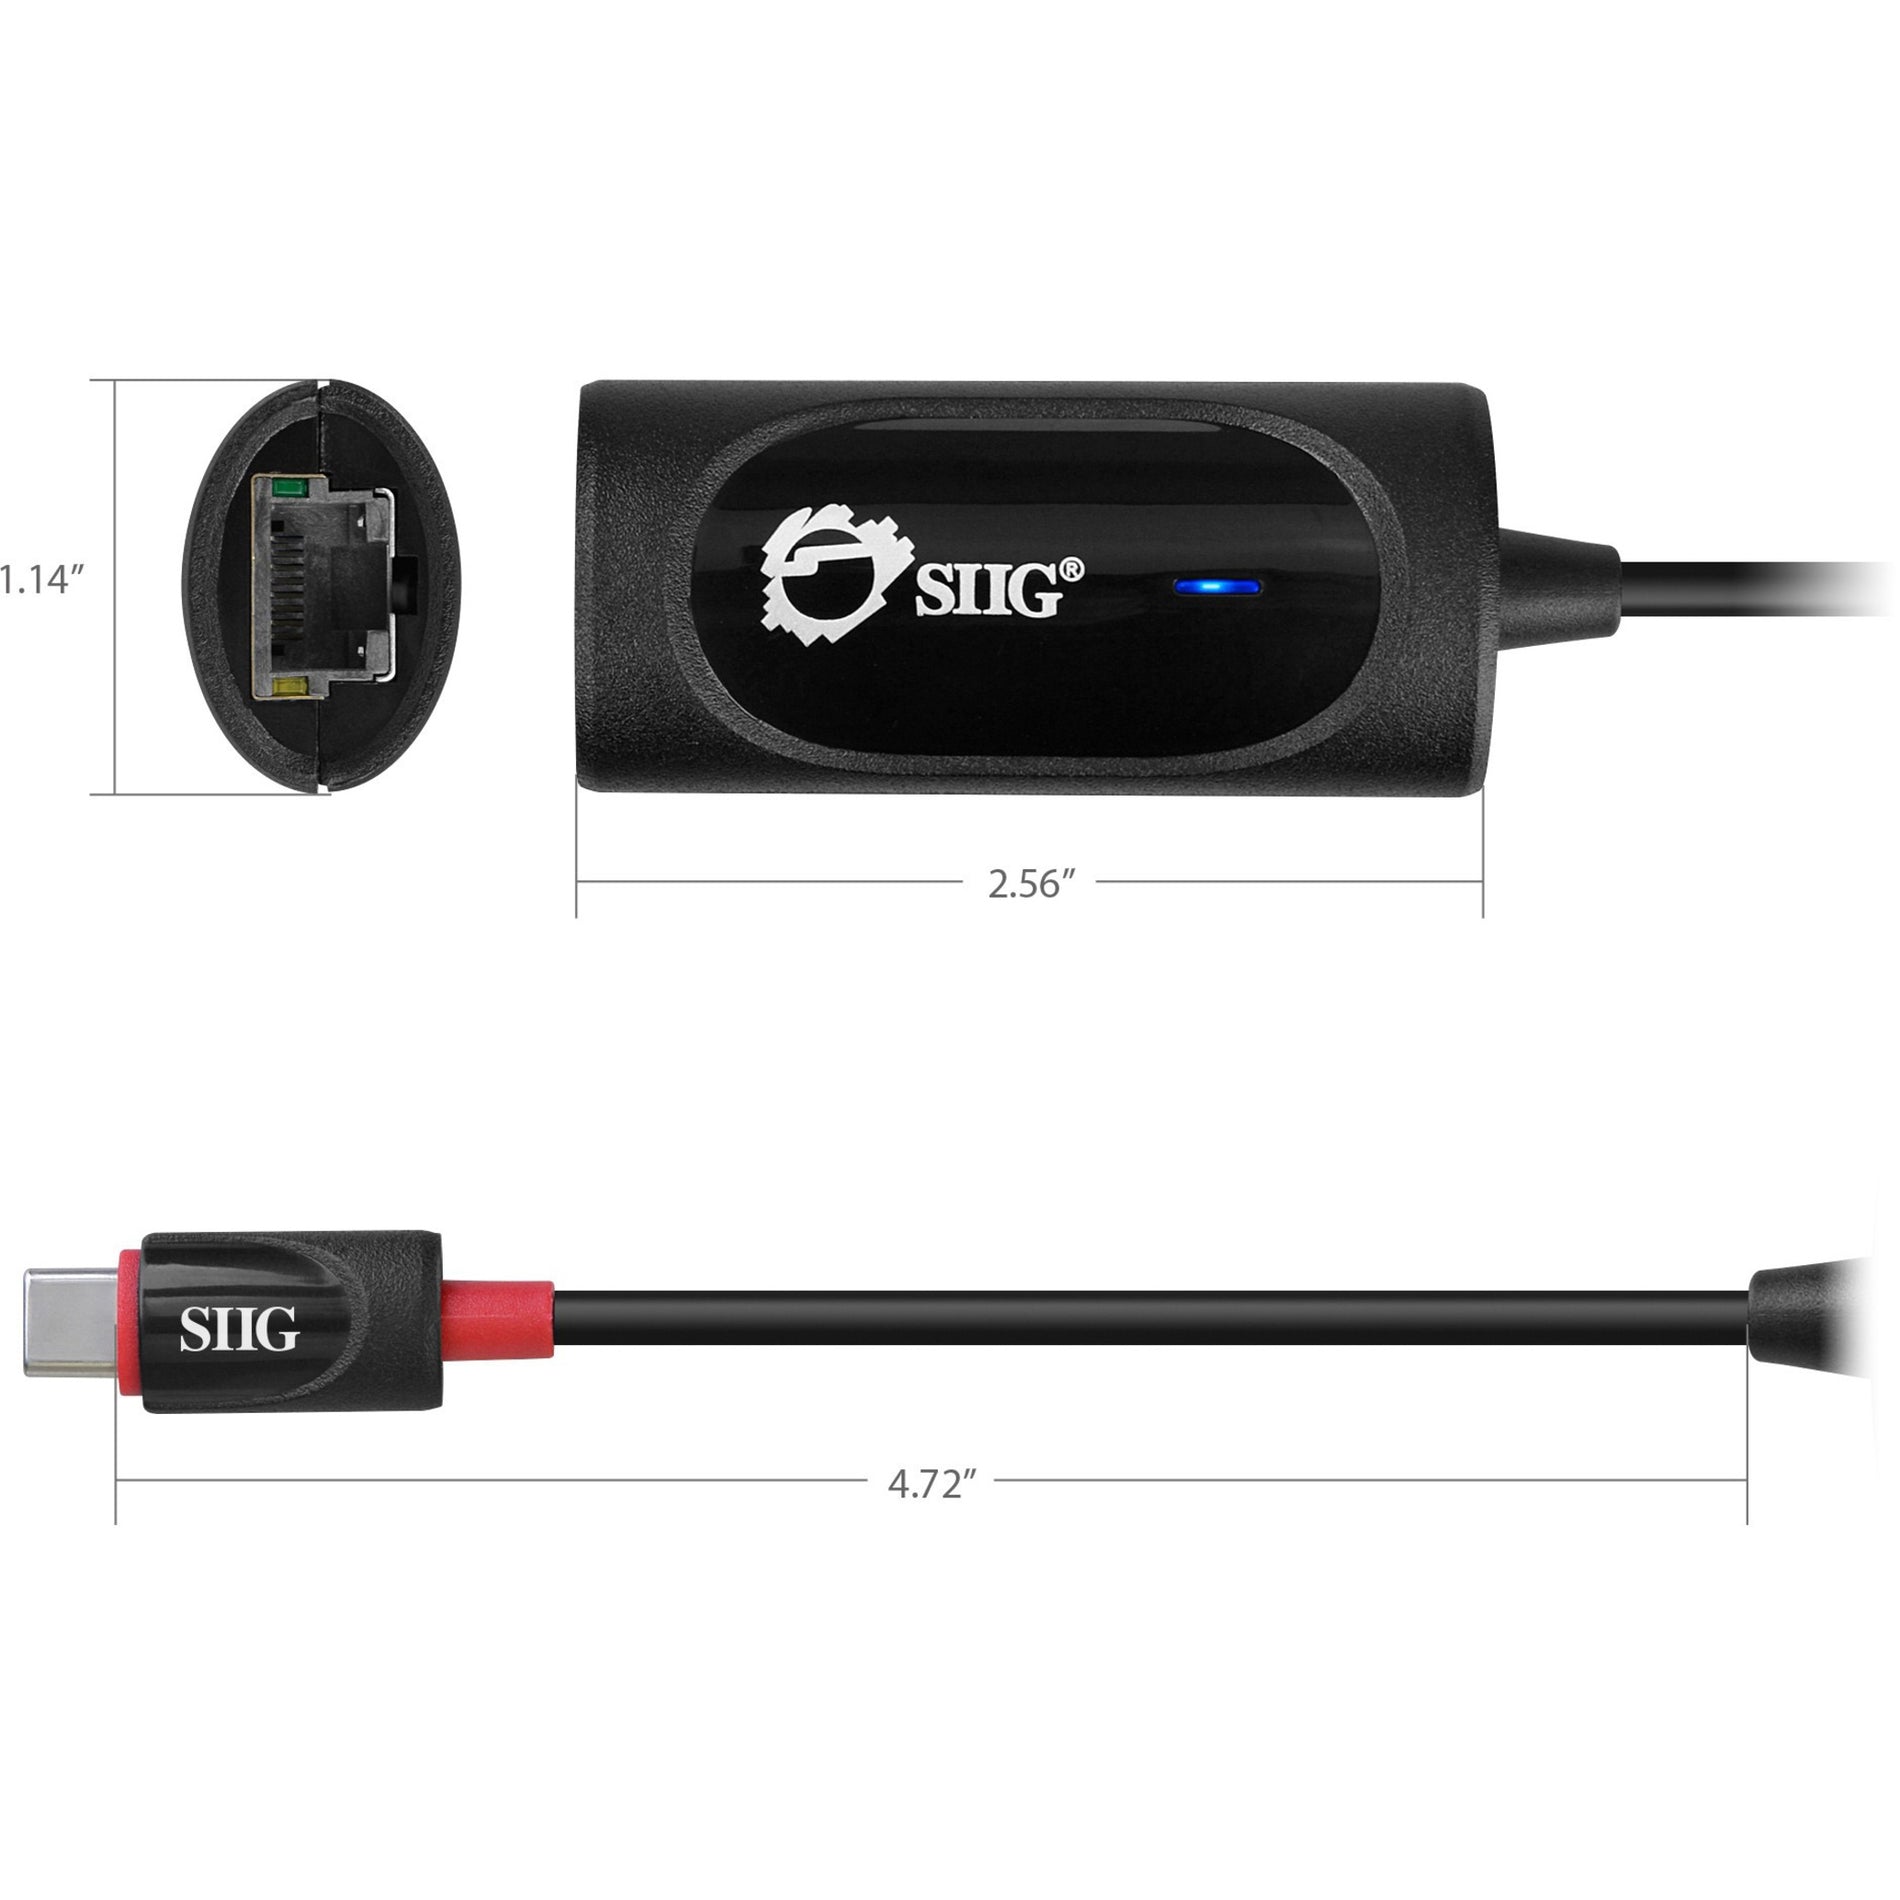 SIIG JU-NE0914-S1 USB-C to Gigabit Ethernet Adapter - USB 3.0, Fast and Reliable Internet Connection